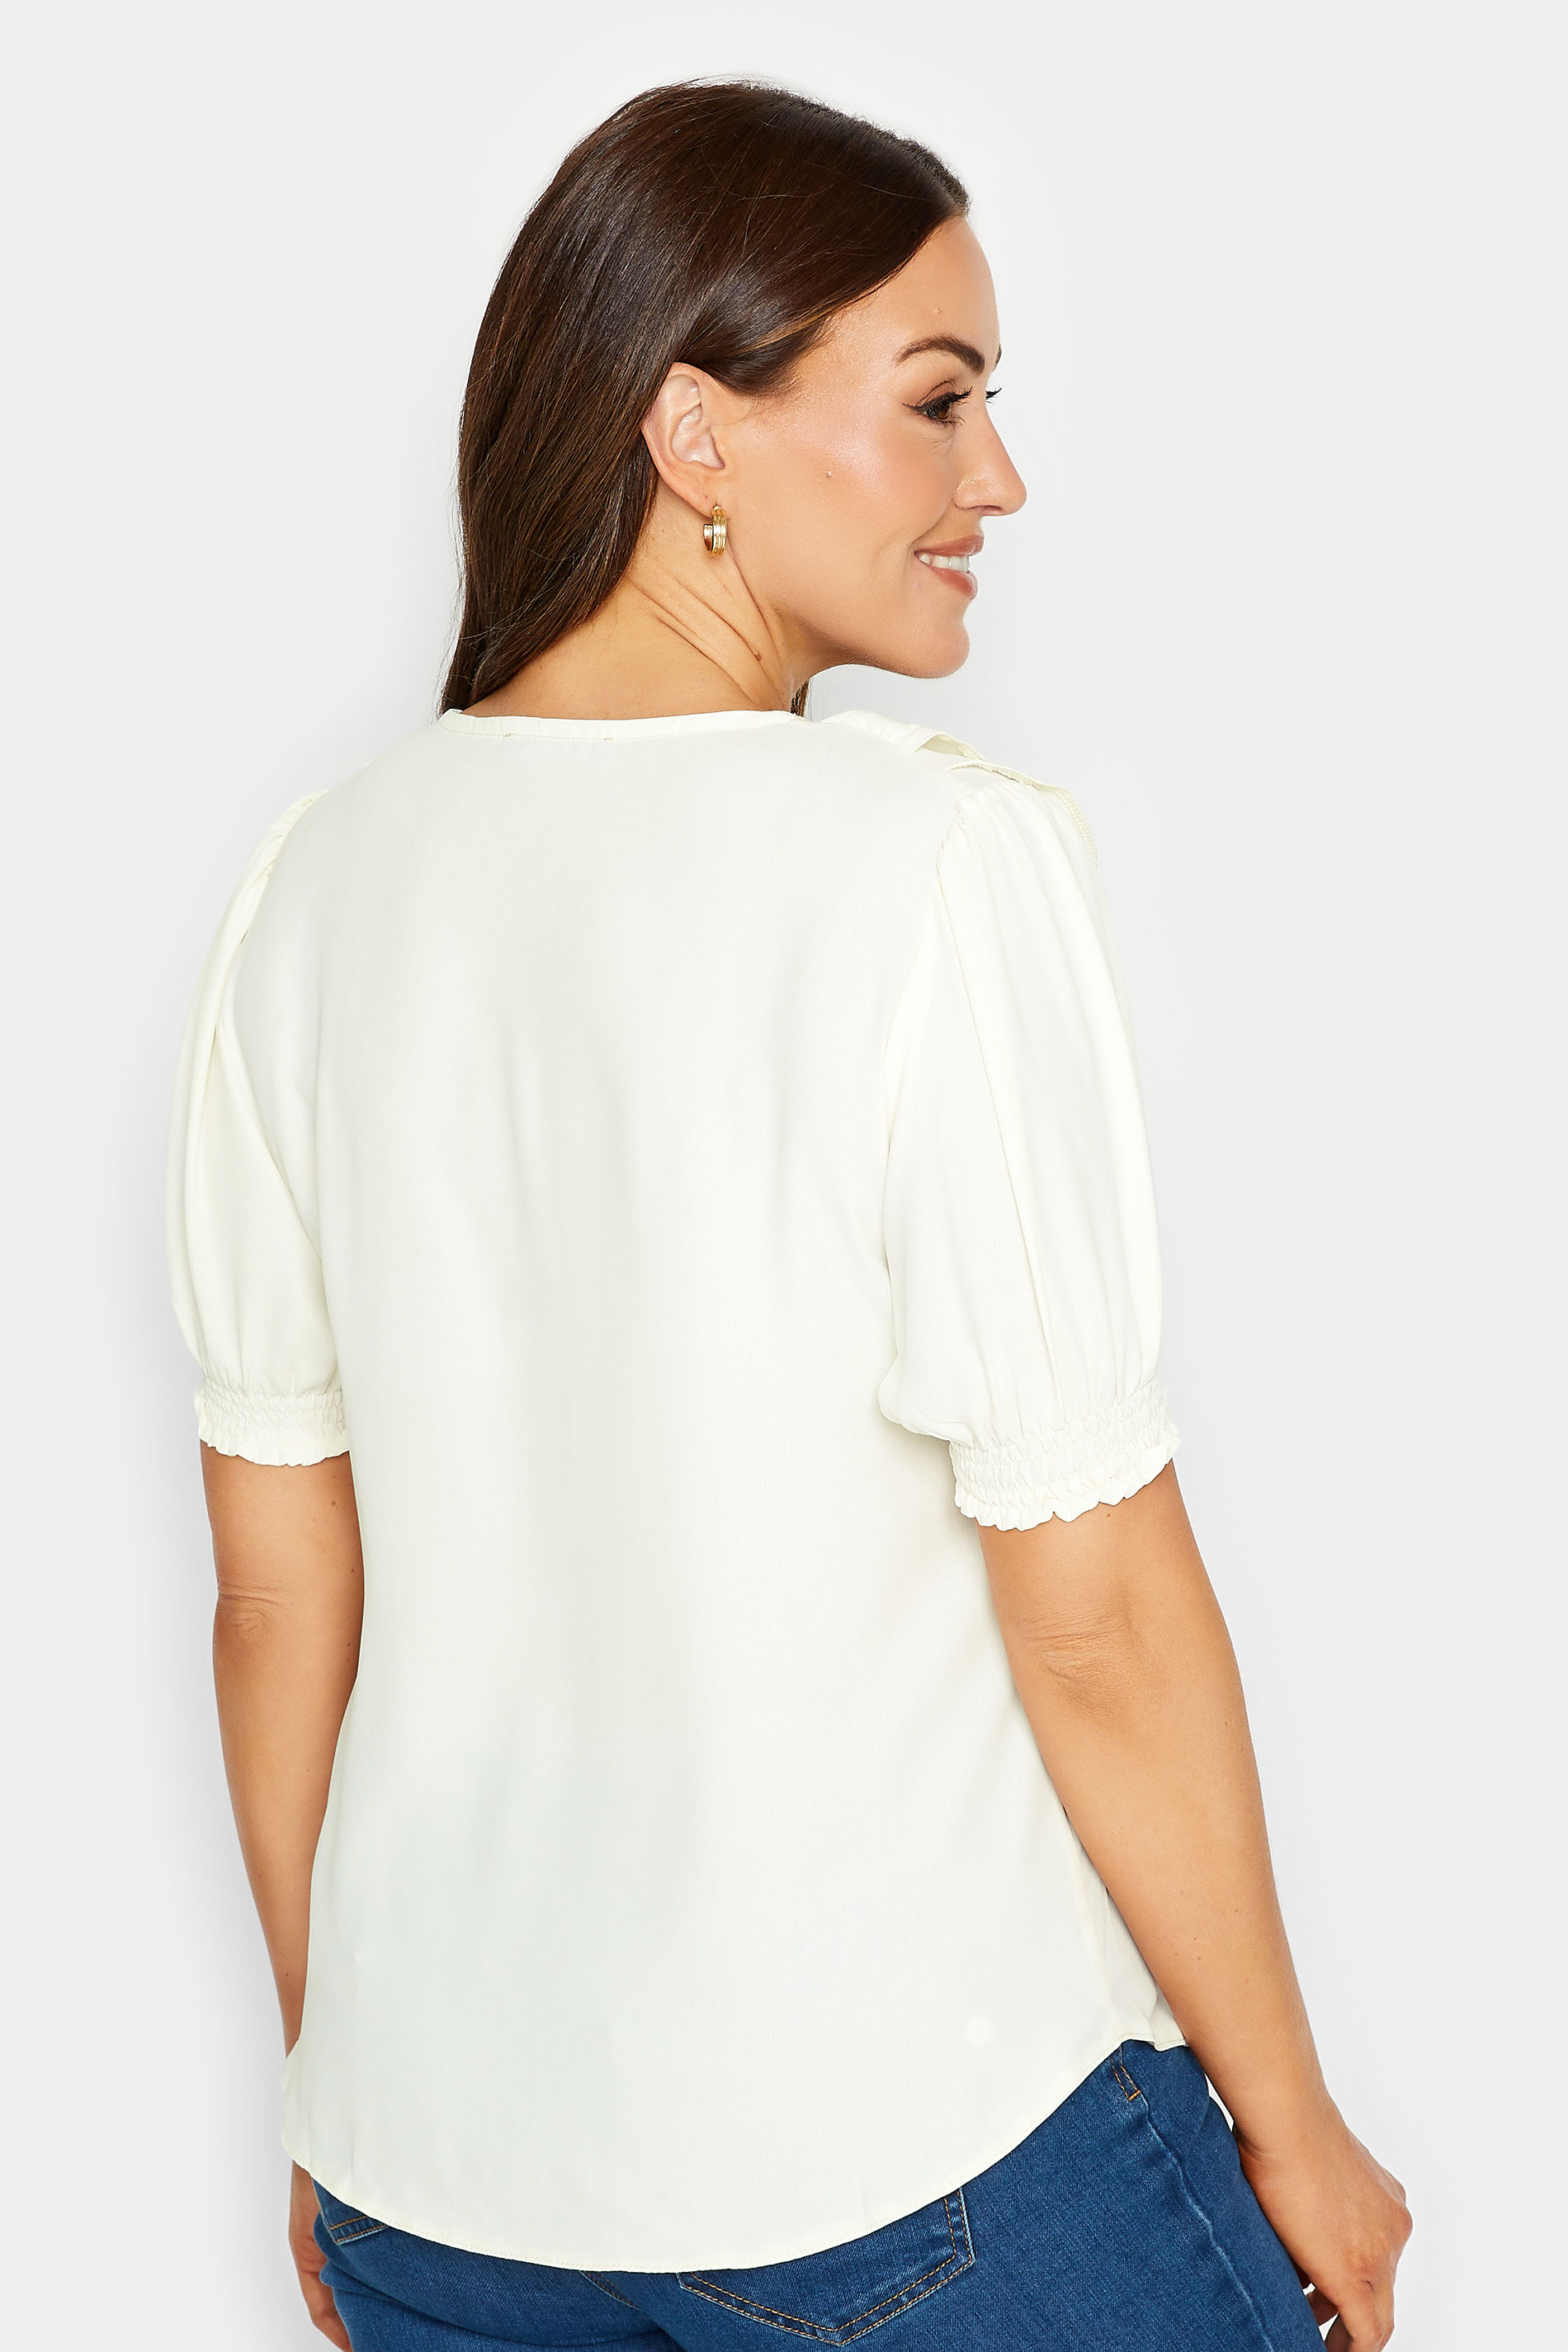 M&Co Ivory White Frill Front Blouse | M&Co 3